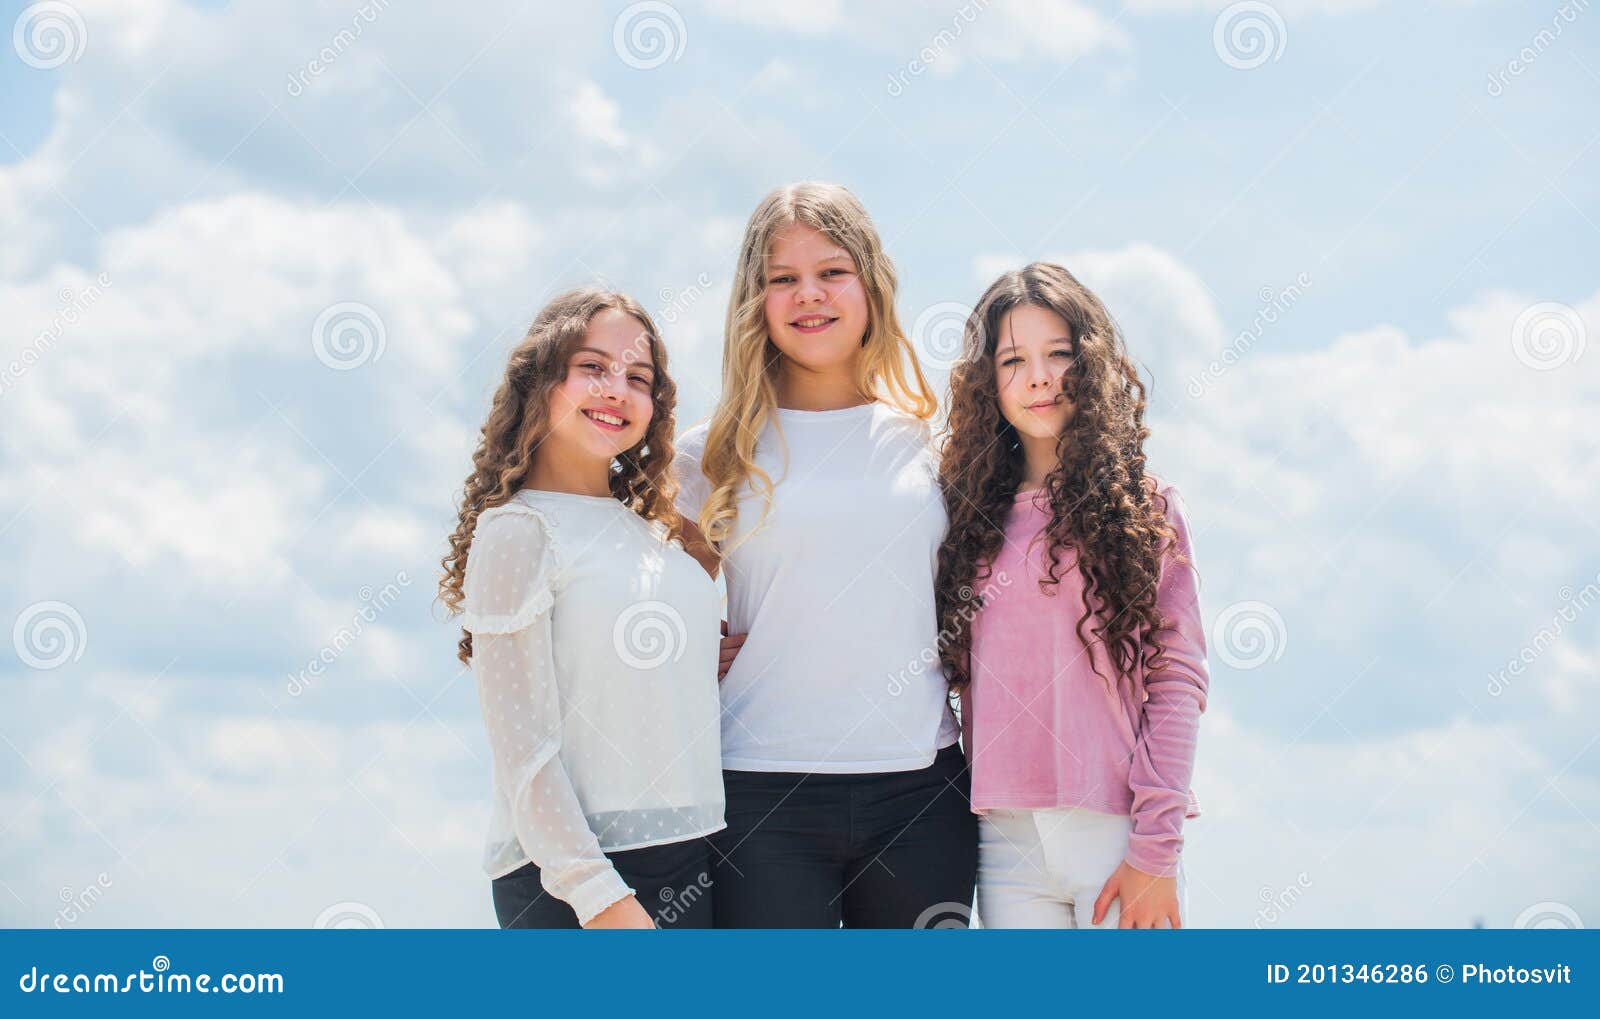 Three Girls on Sky Background. Concept of Female Friendship ...